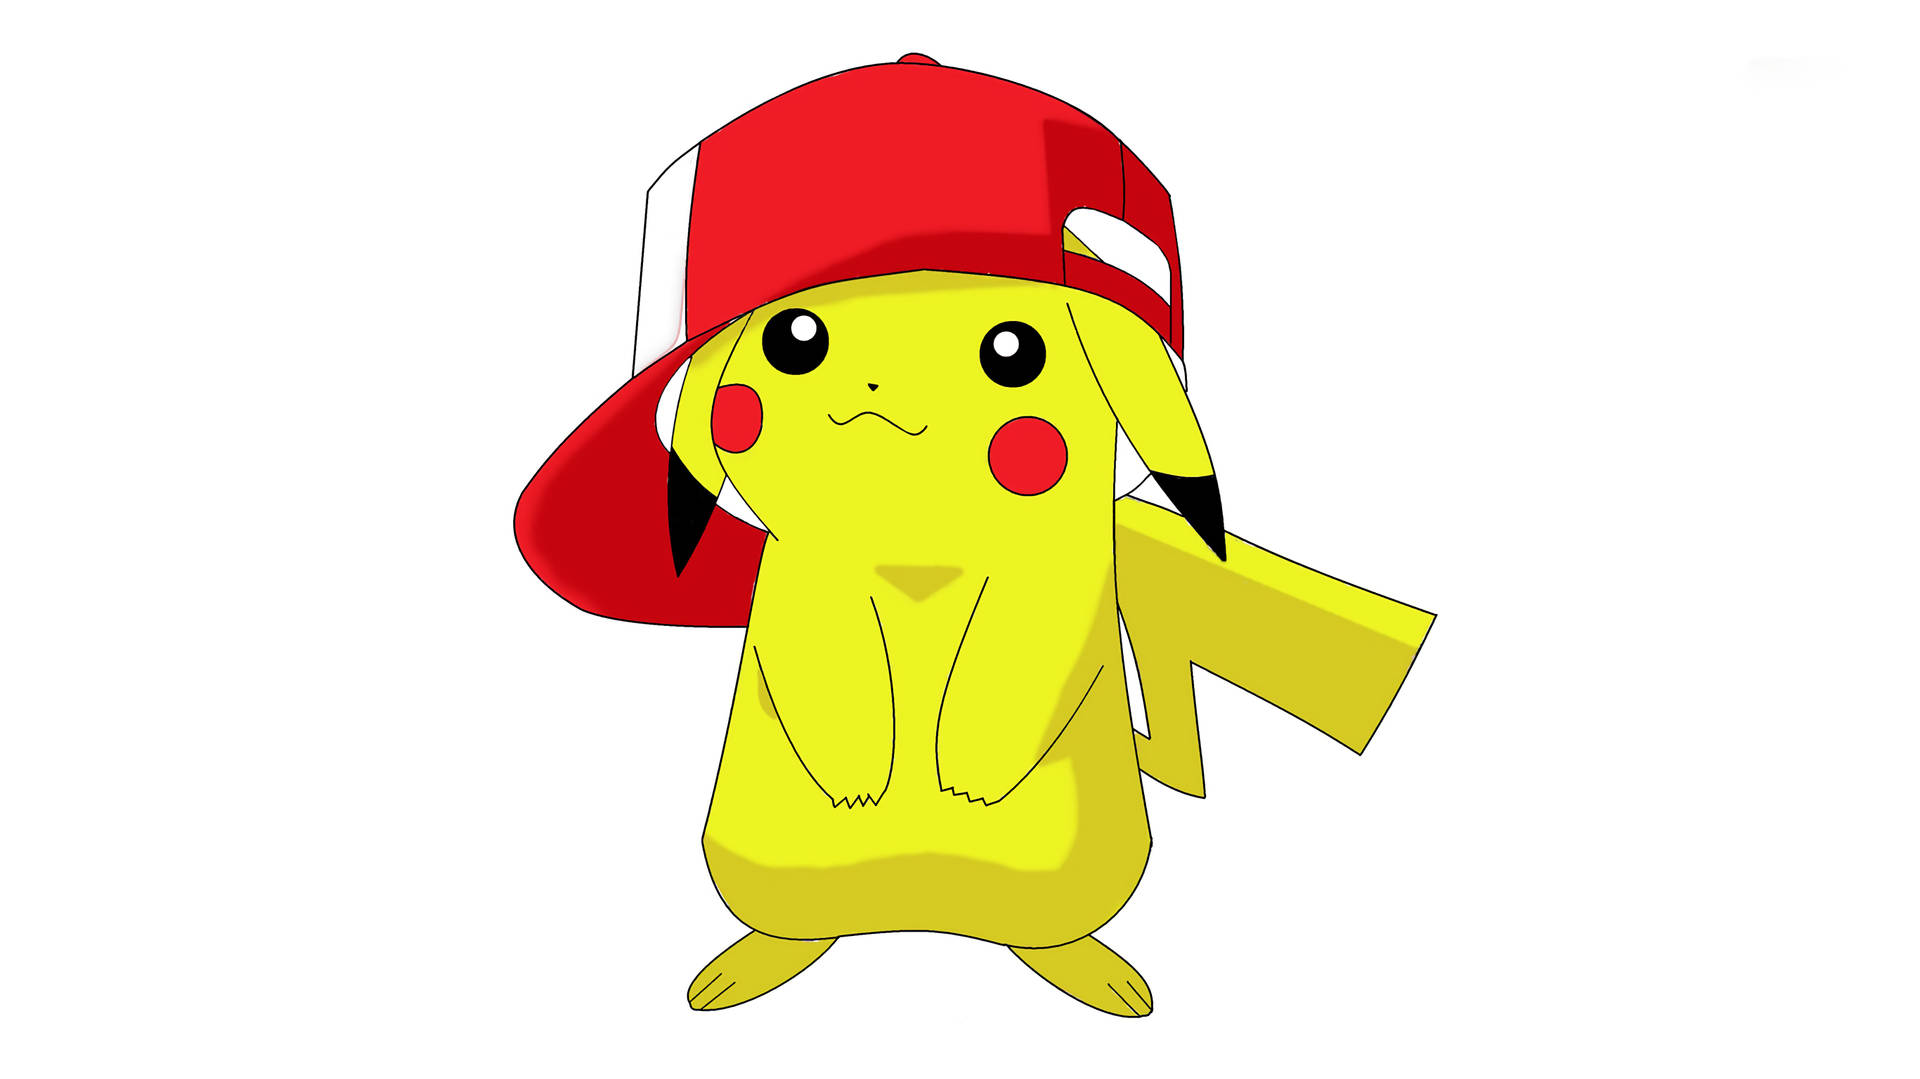 Cool Pokemon Pikachu With Red Hat Wallpaper